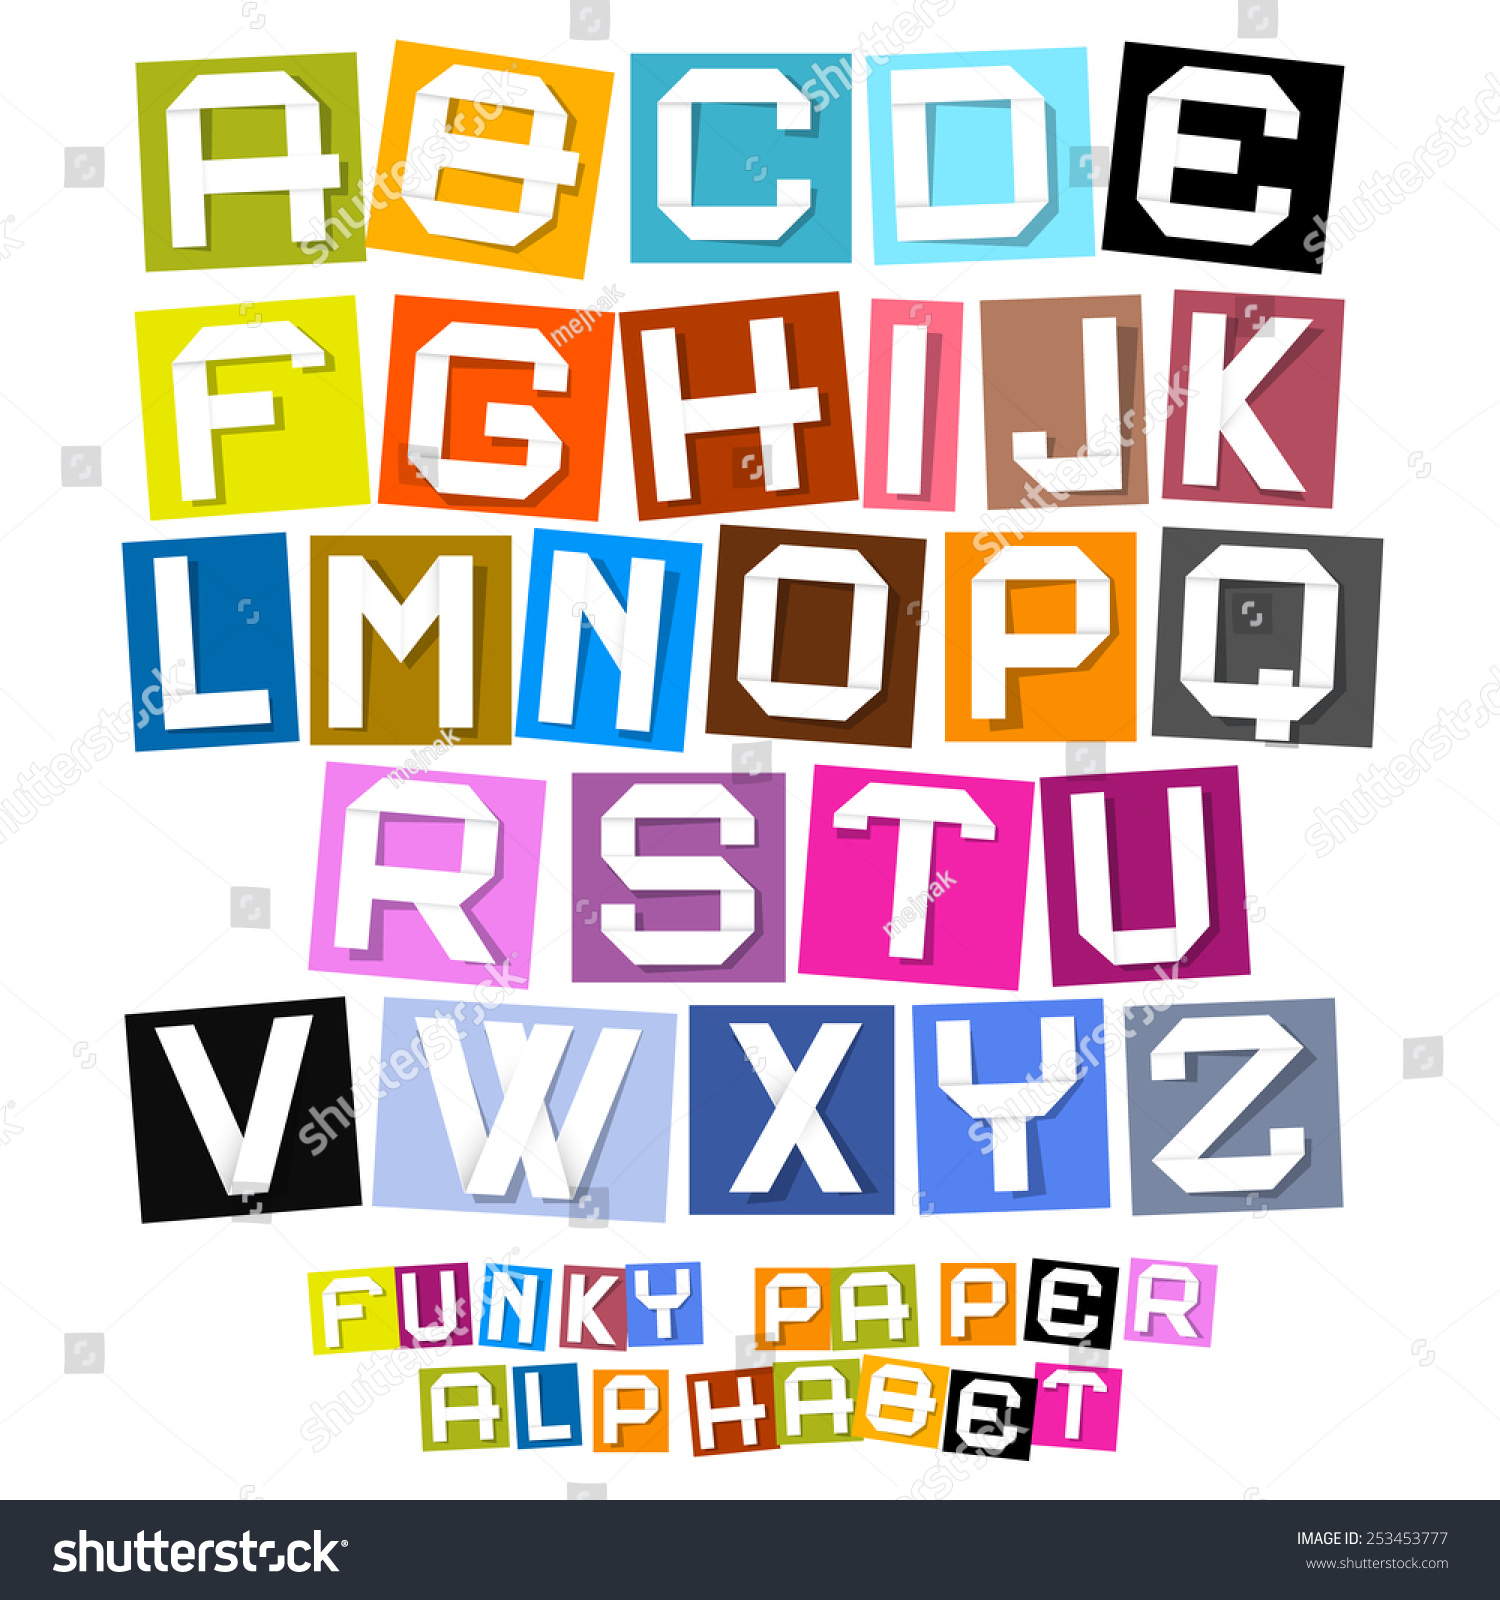 Colorful Paper Cut Vector Funky Alphabet Stock Vector 253453777